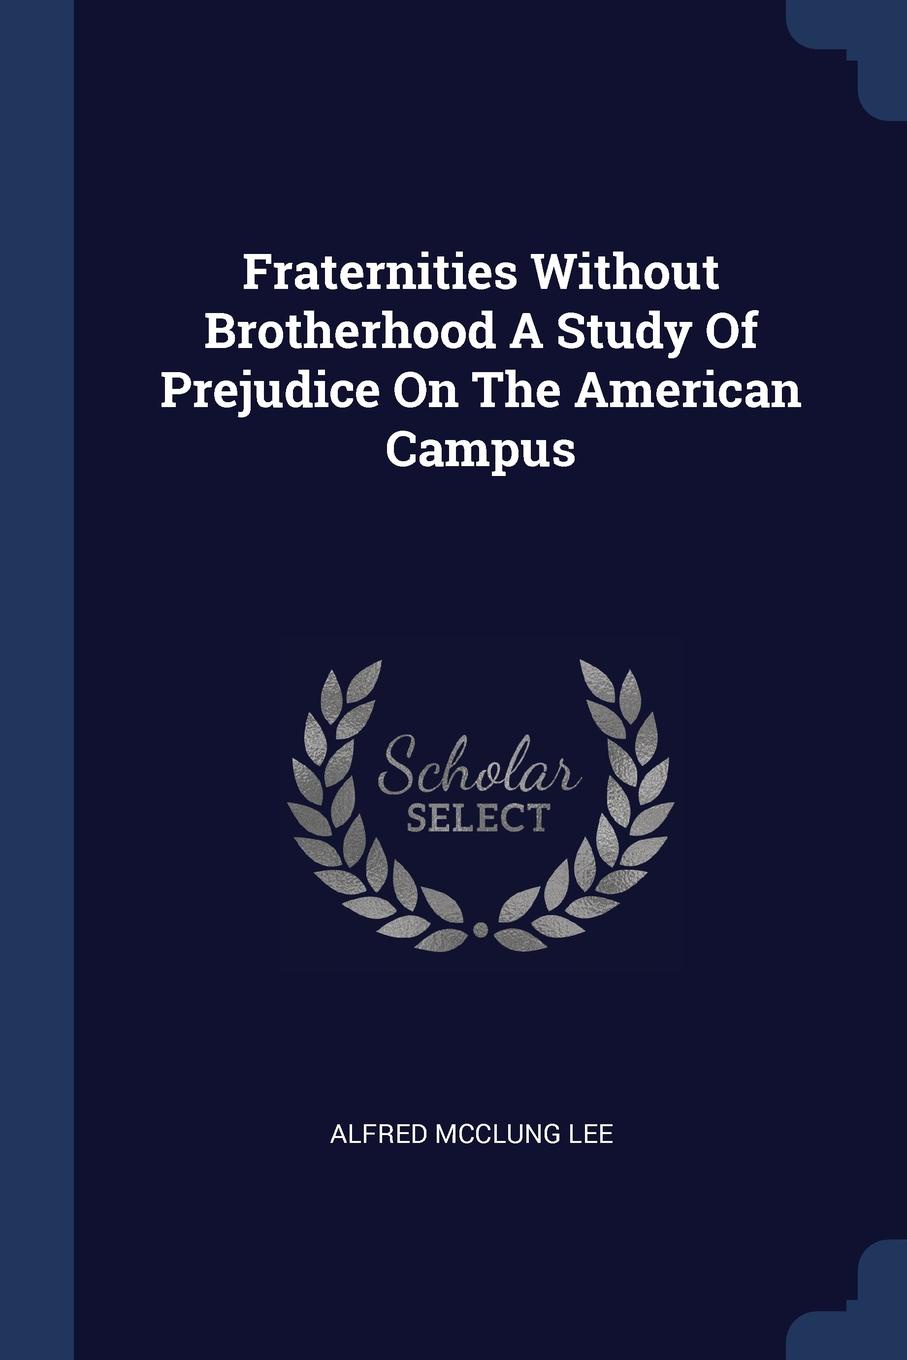 Fraternities Without Brotherhood A Study Of Prejudice On The American Campus